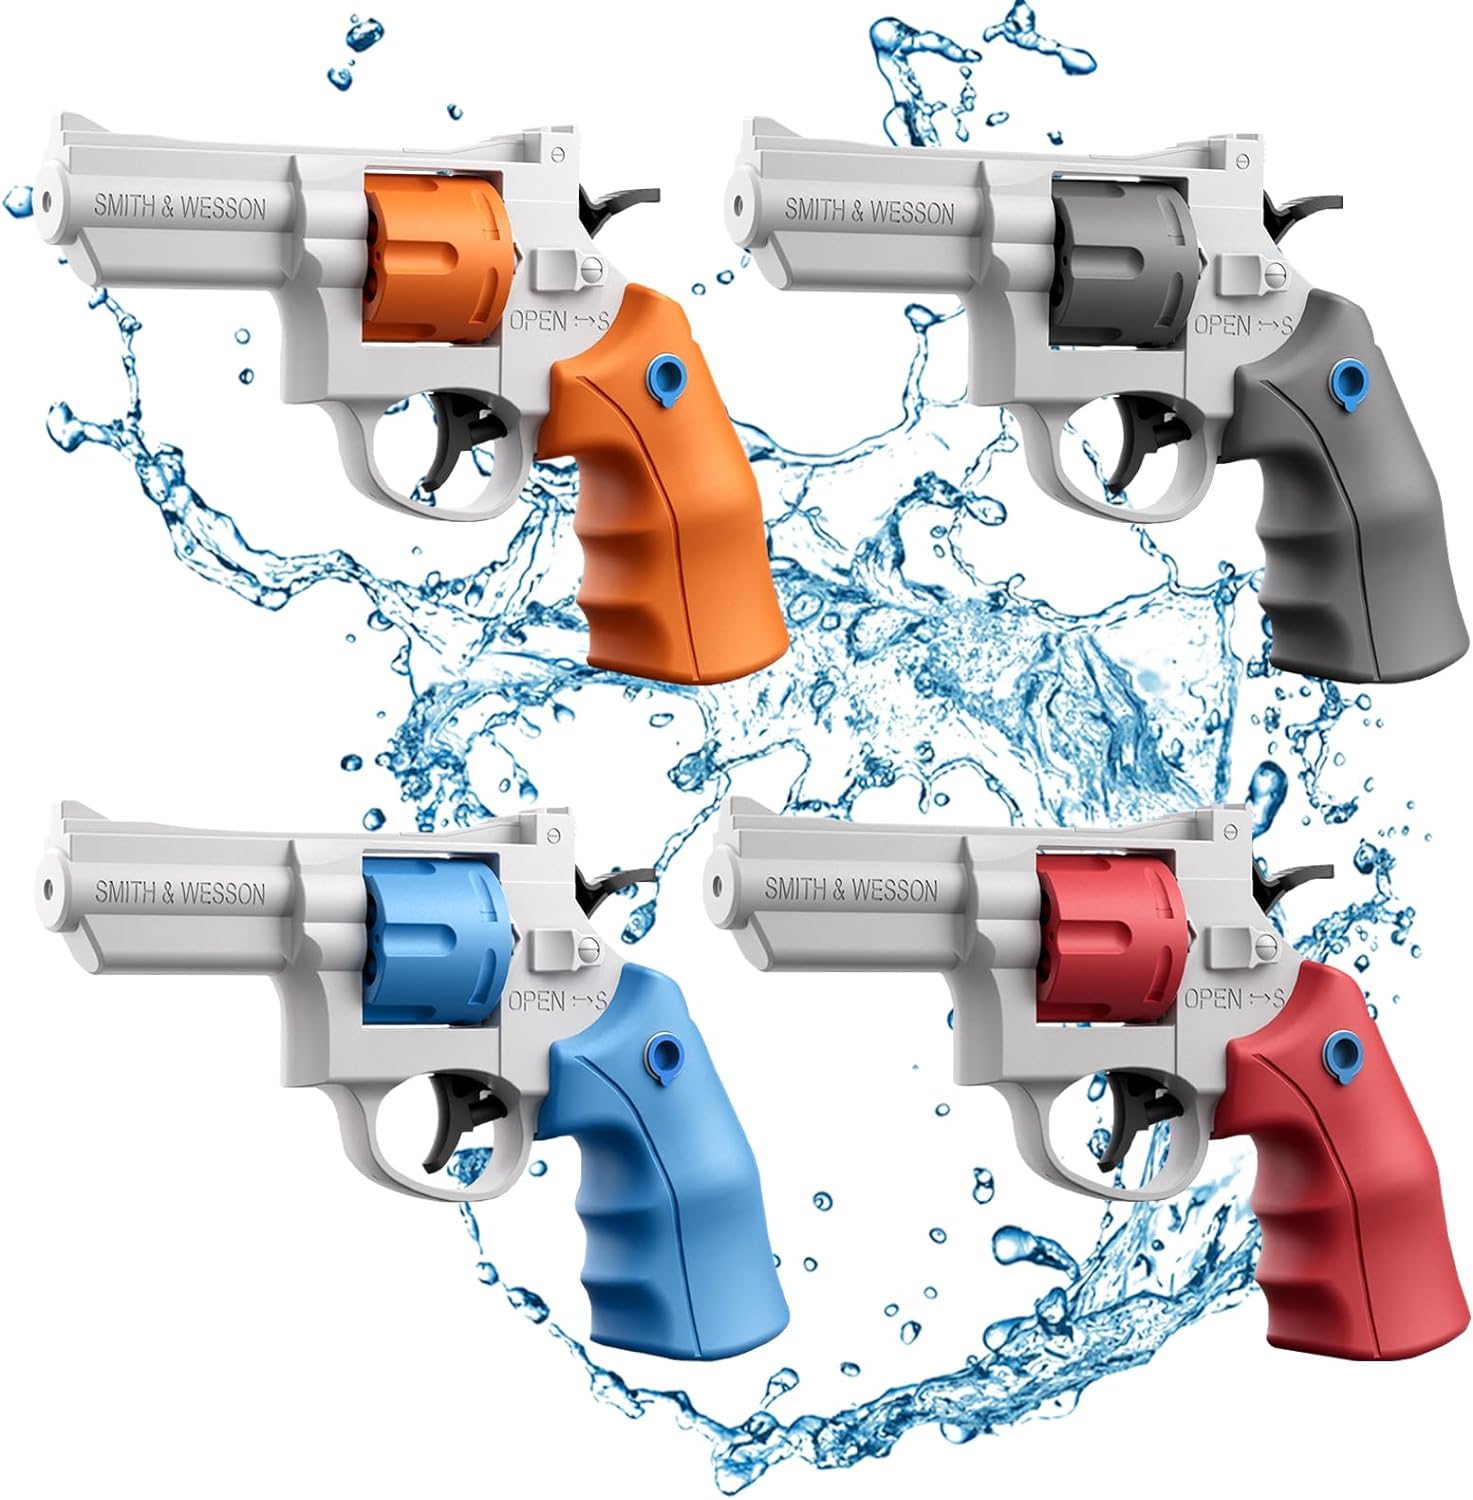 4 Pcs Water Gun,200CC Capacity Left wheel Toys,Long Range Squirts up to 16-25ft Outdoors Summer Pool Toys